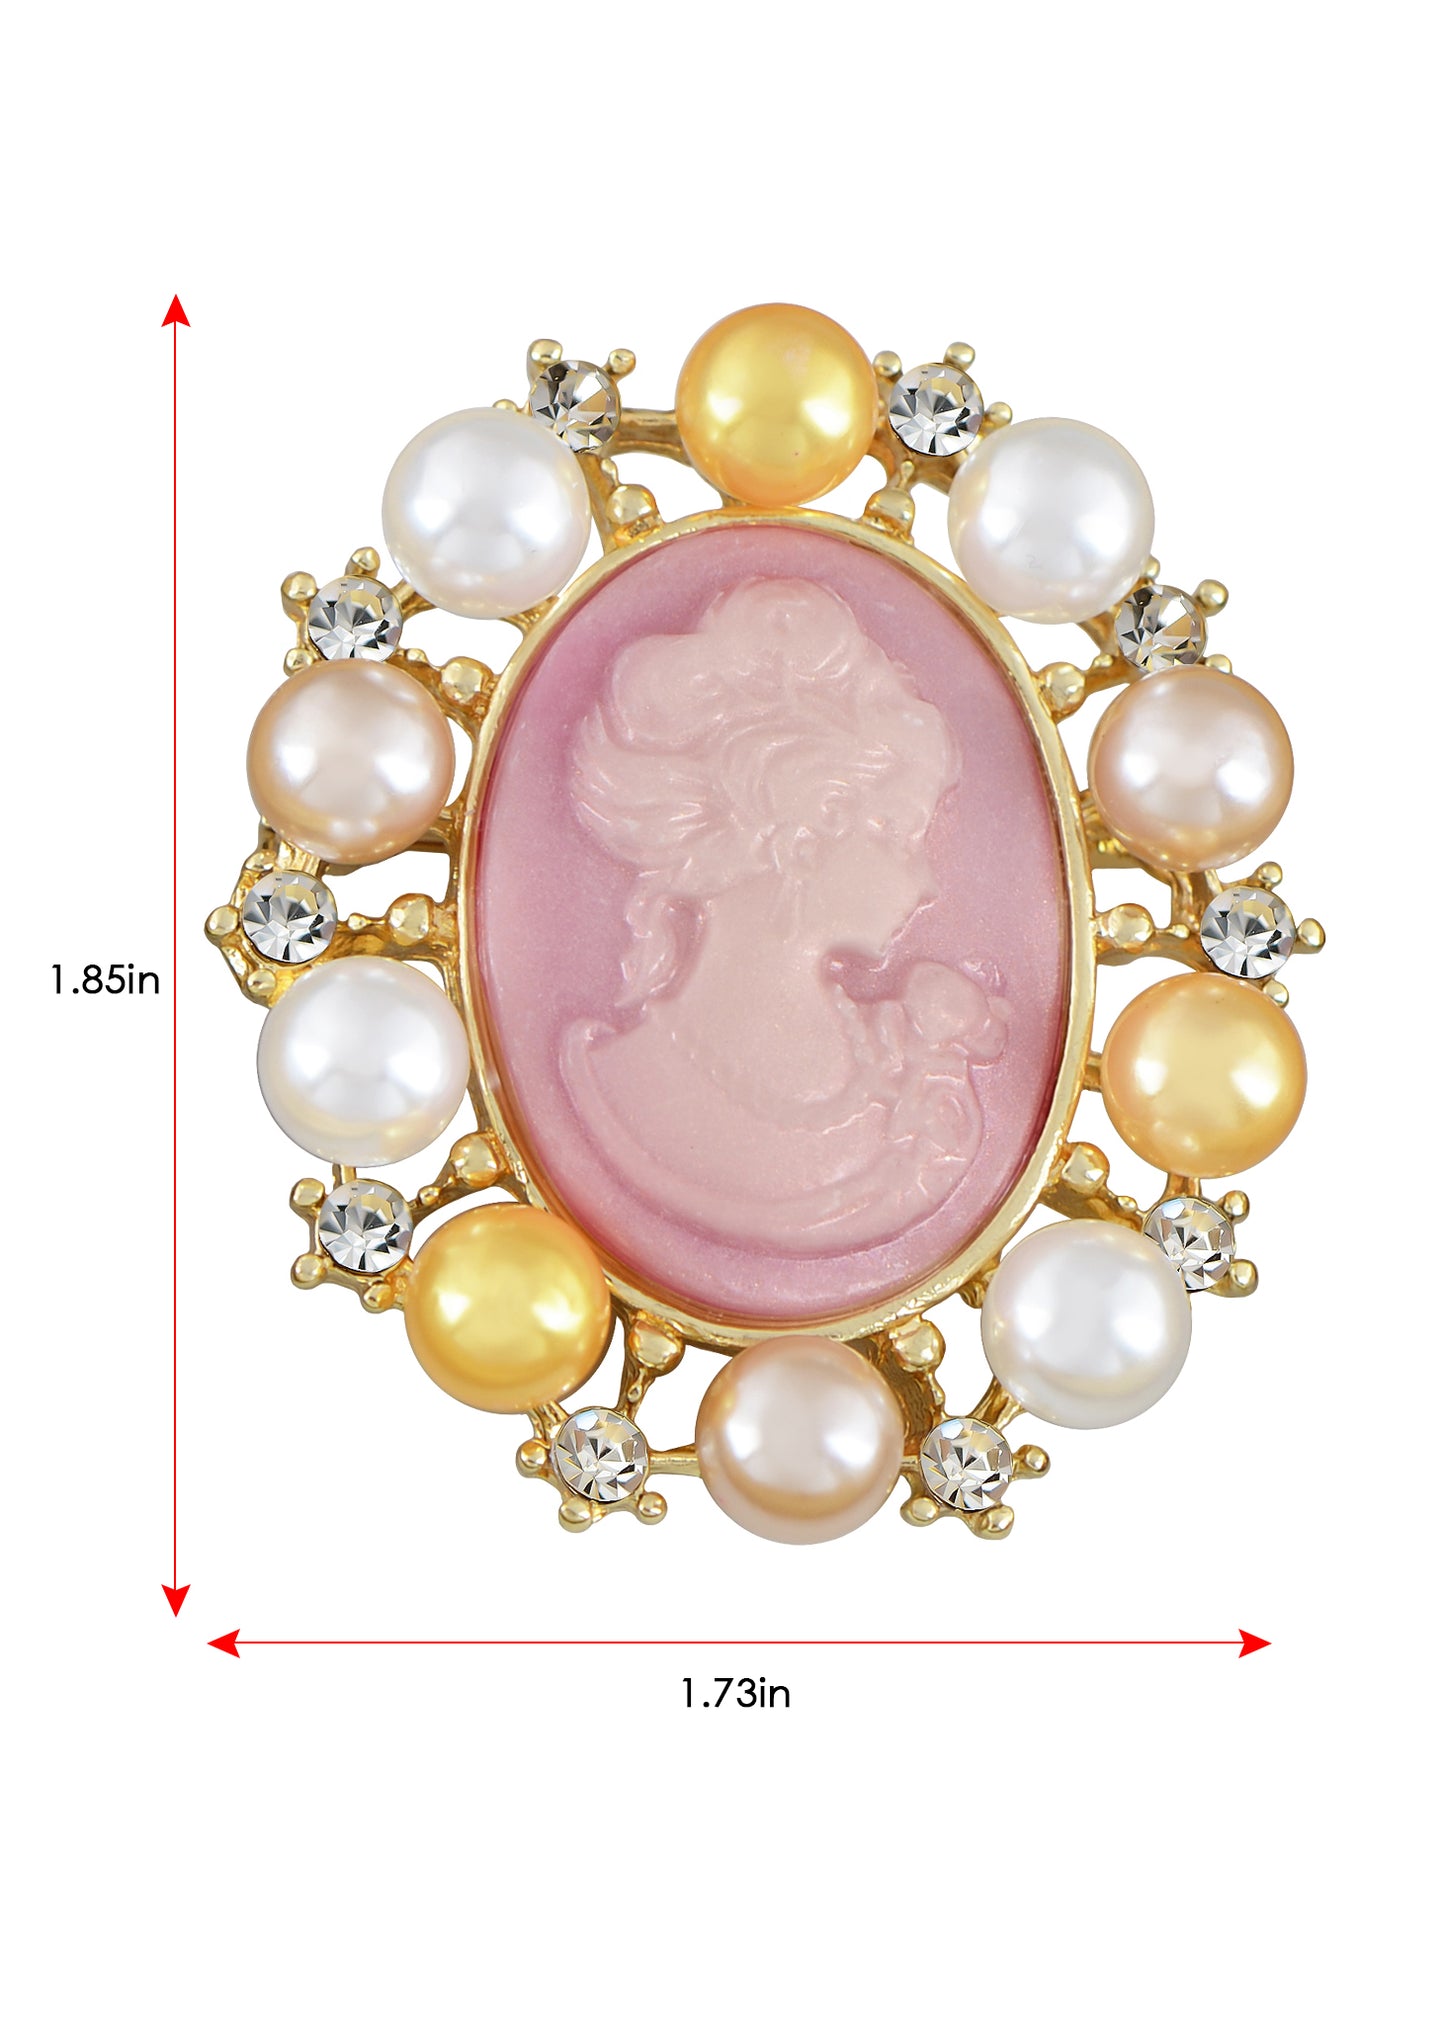 Alilang Vintage Inspired Faux Pearl Clear Crystal Rhinestones Victorian Lady Cameo Brooch Pin